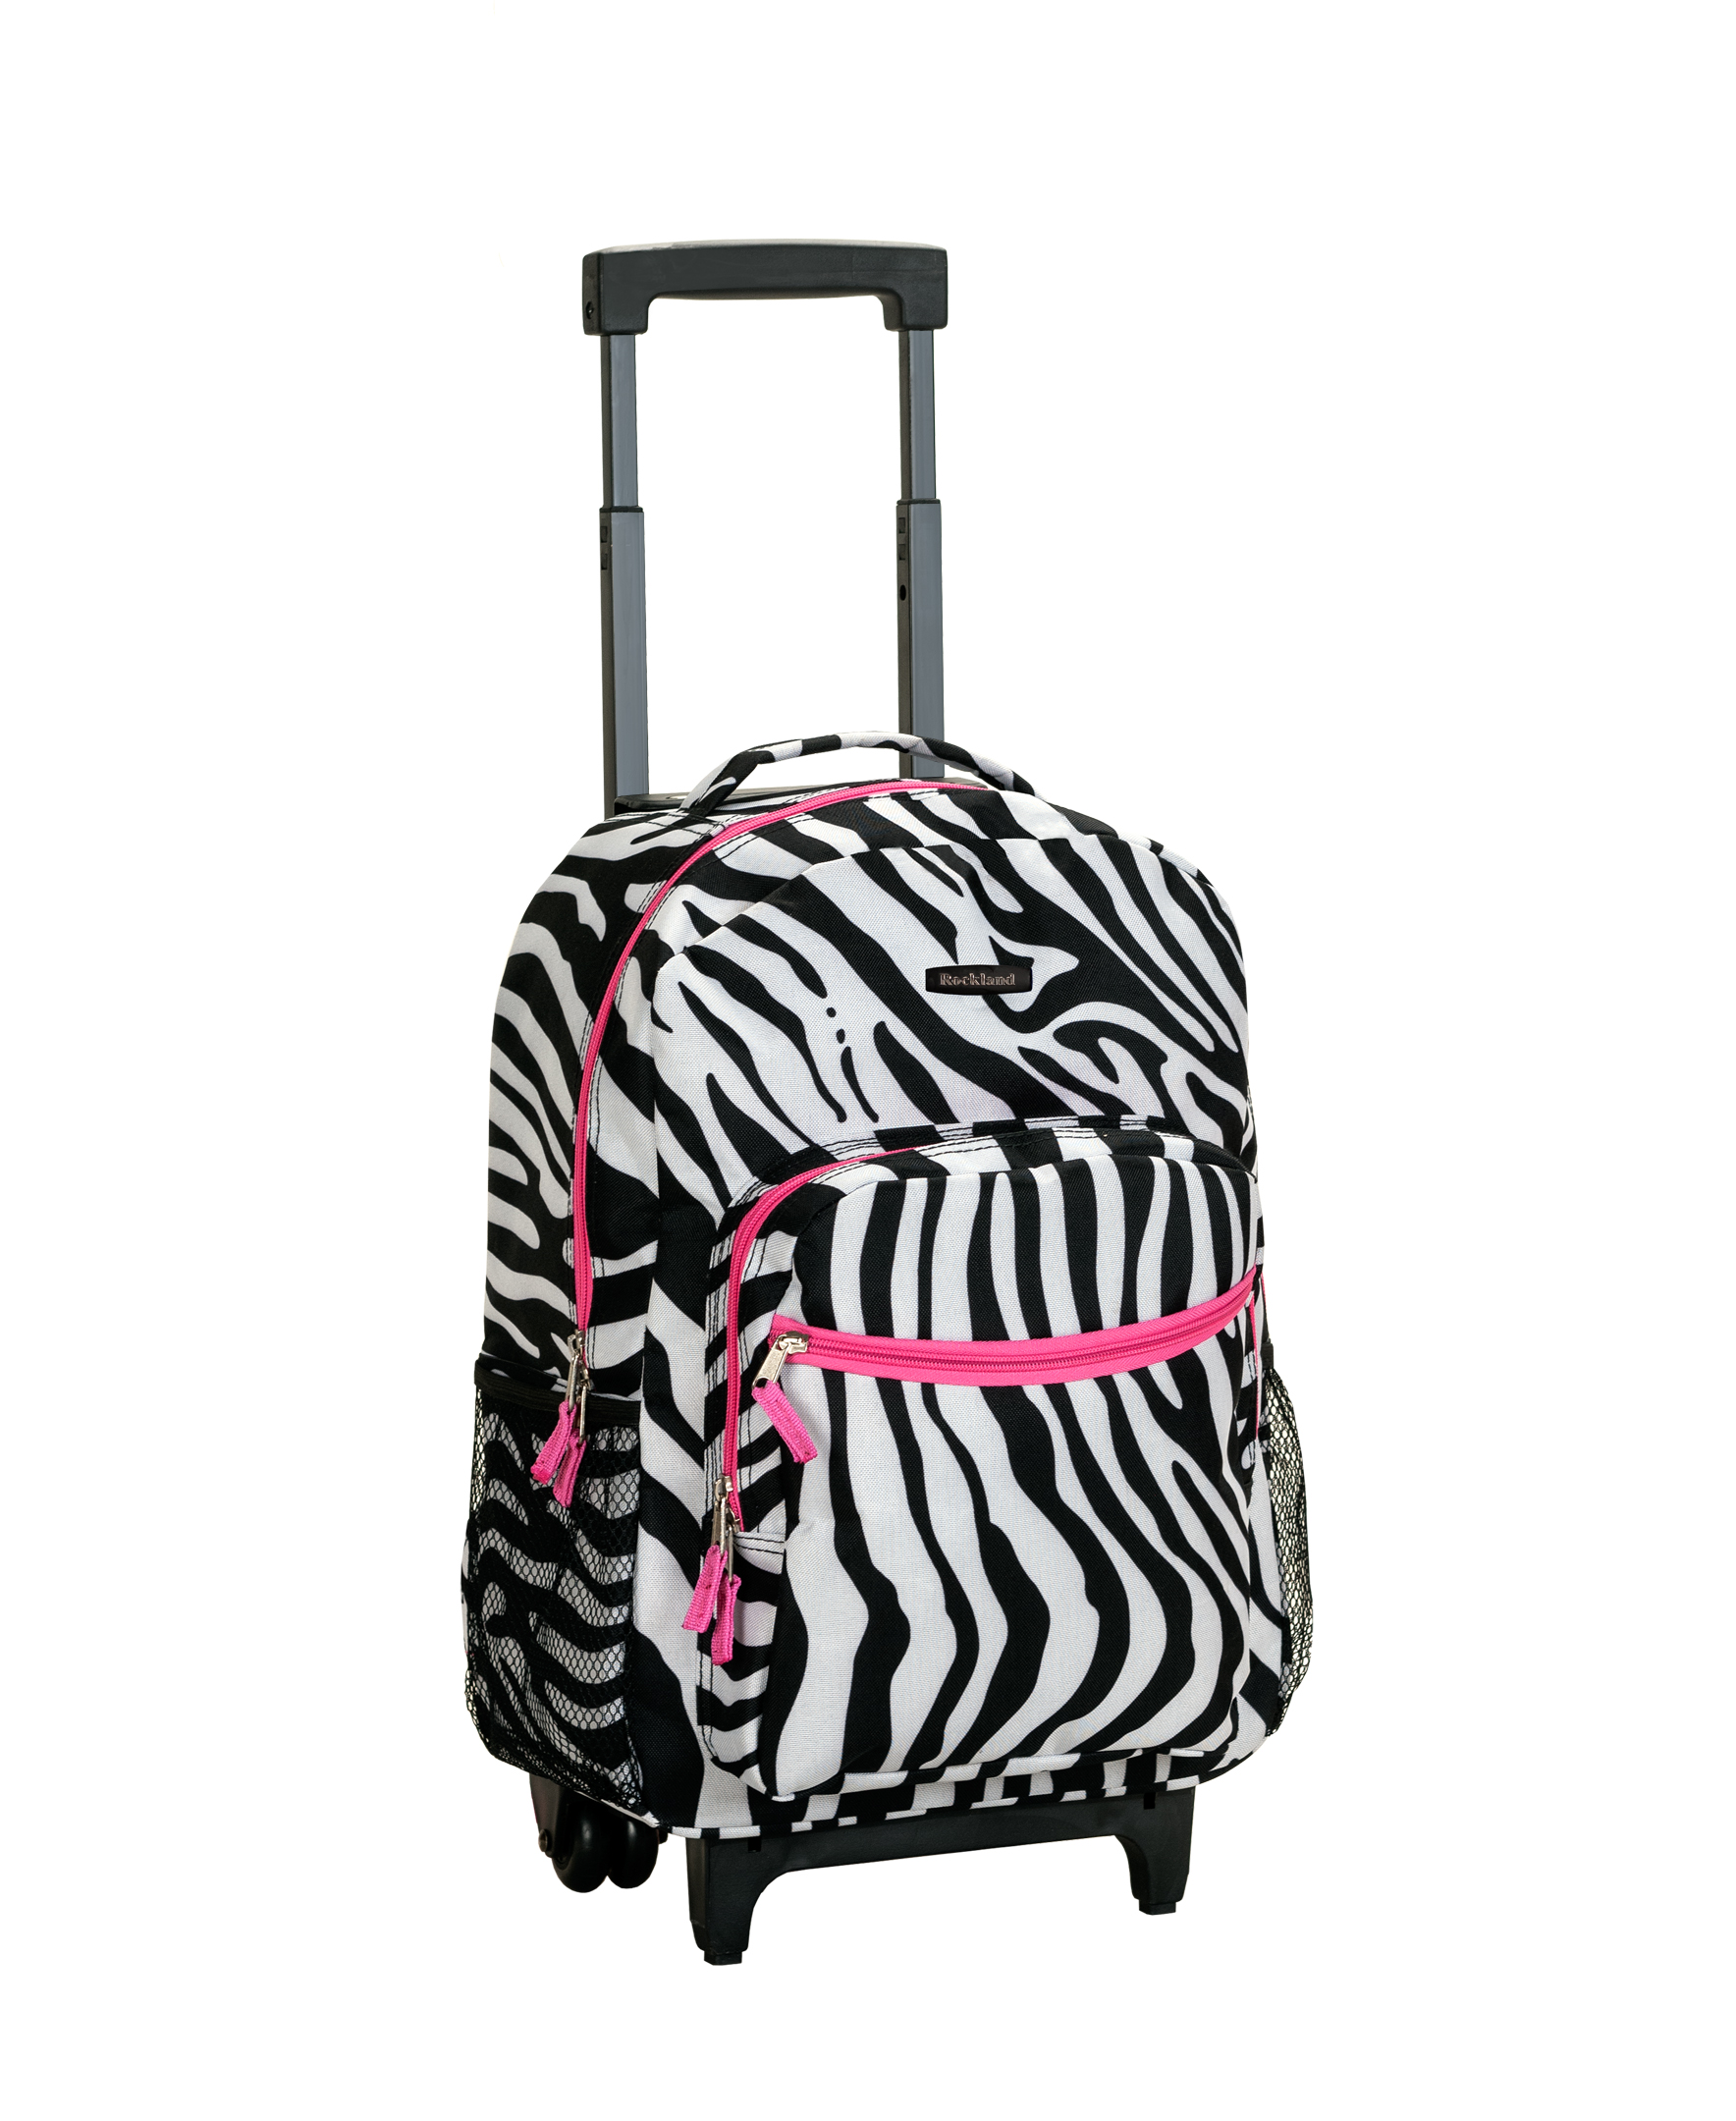 Rockland Luggage 17 Rolling Backpack - image 1 of 2